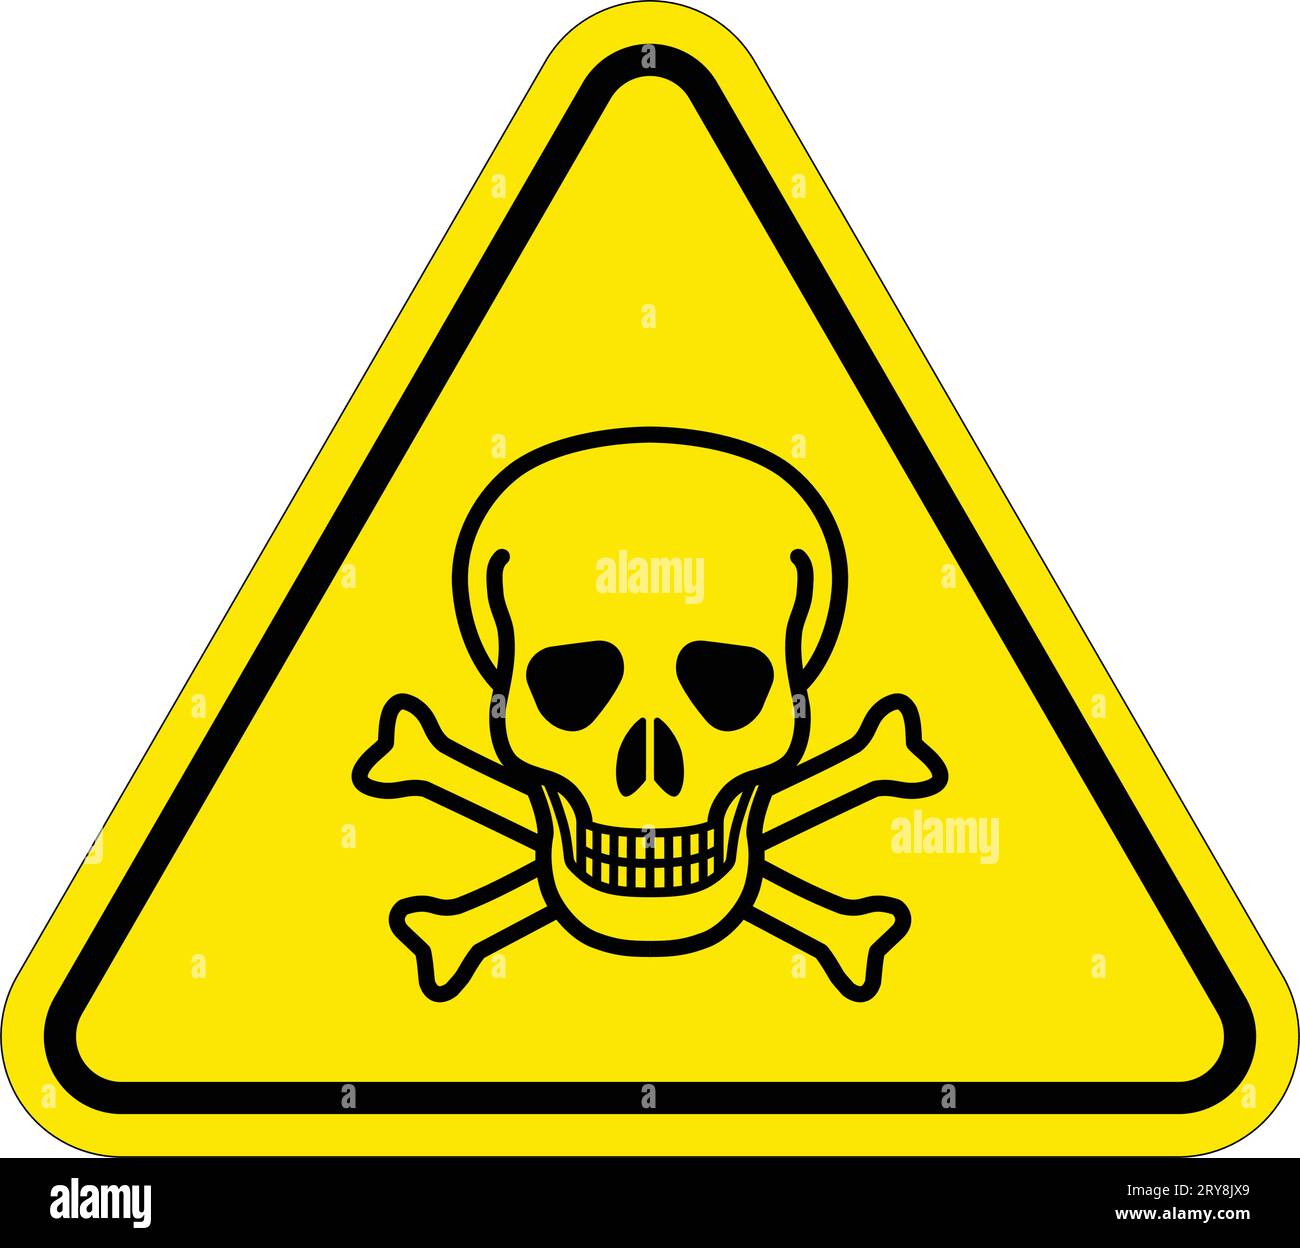 classic poison skull and crossbones in yellow warning danger triangle symbol silhouette isolated on white background vector Stock Vector